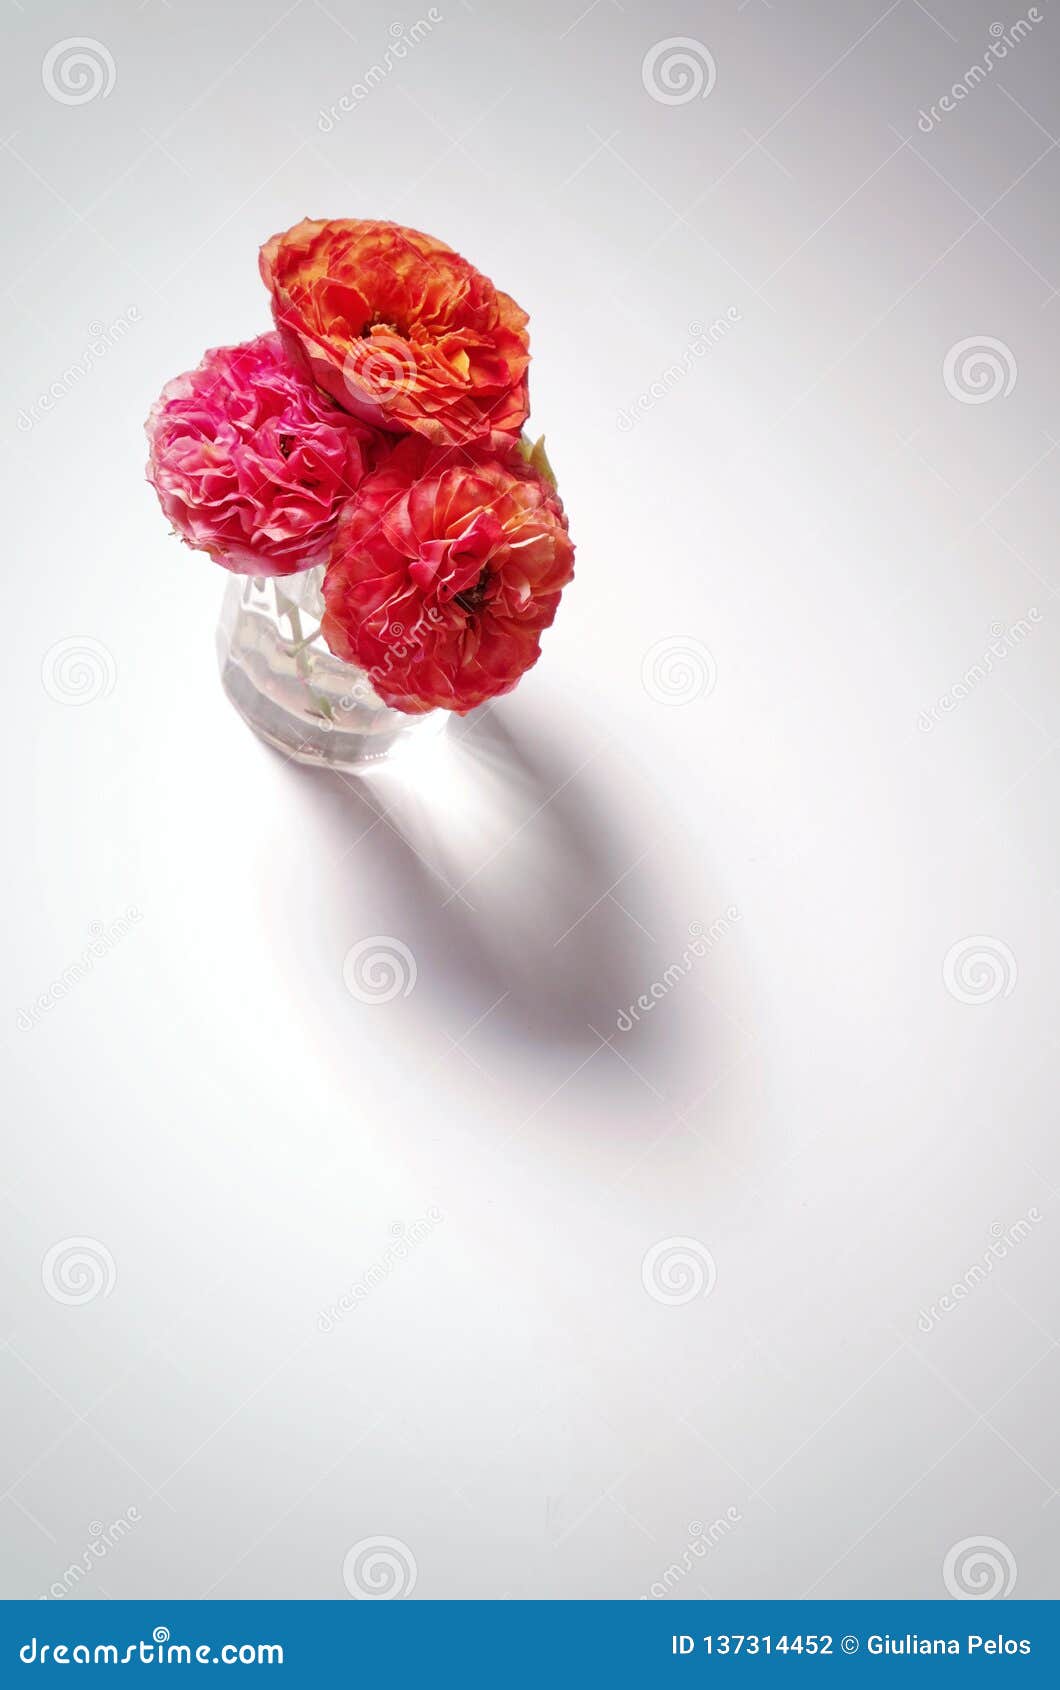 dressed in satin - small roses on white background